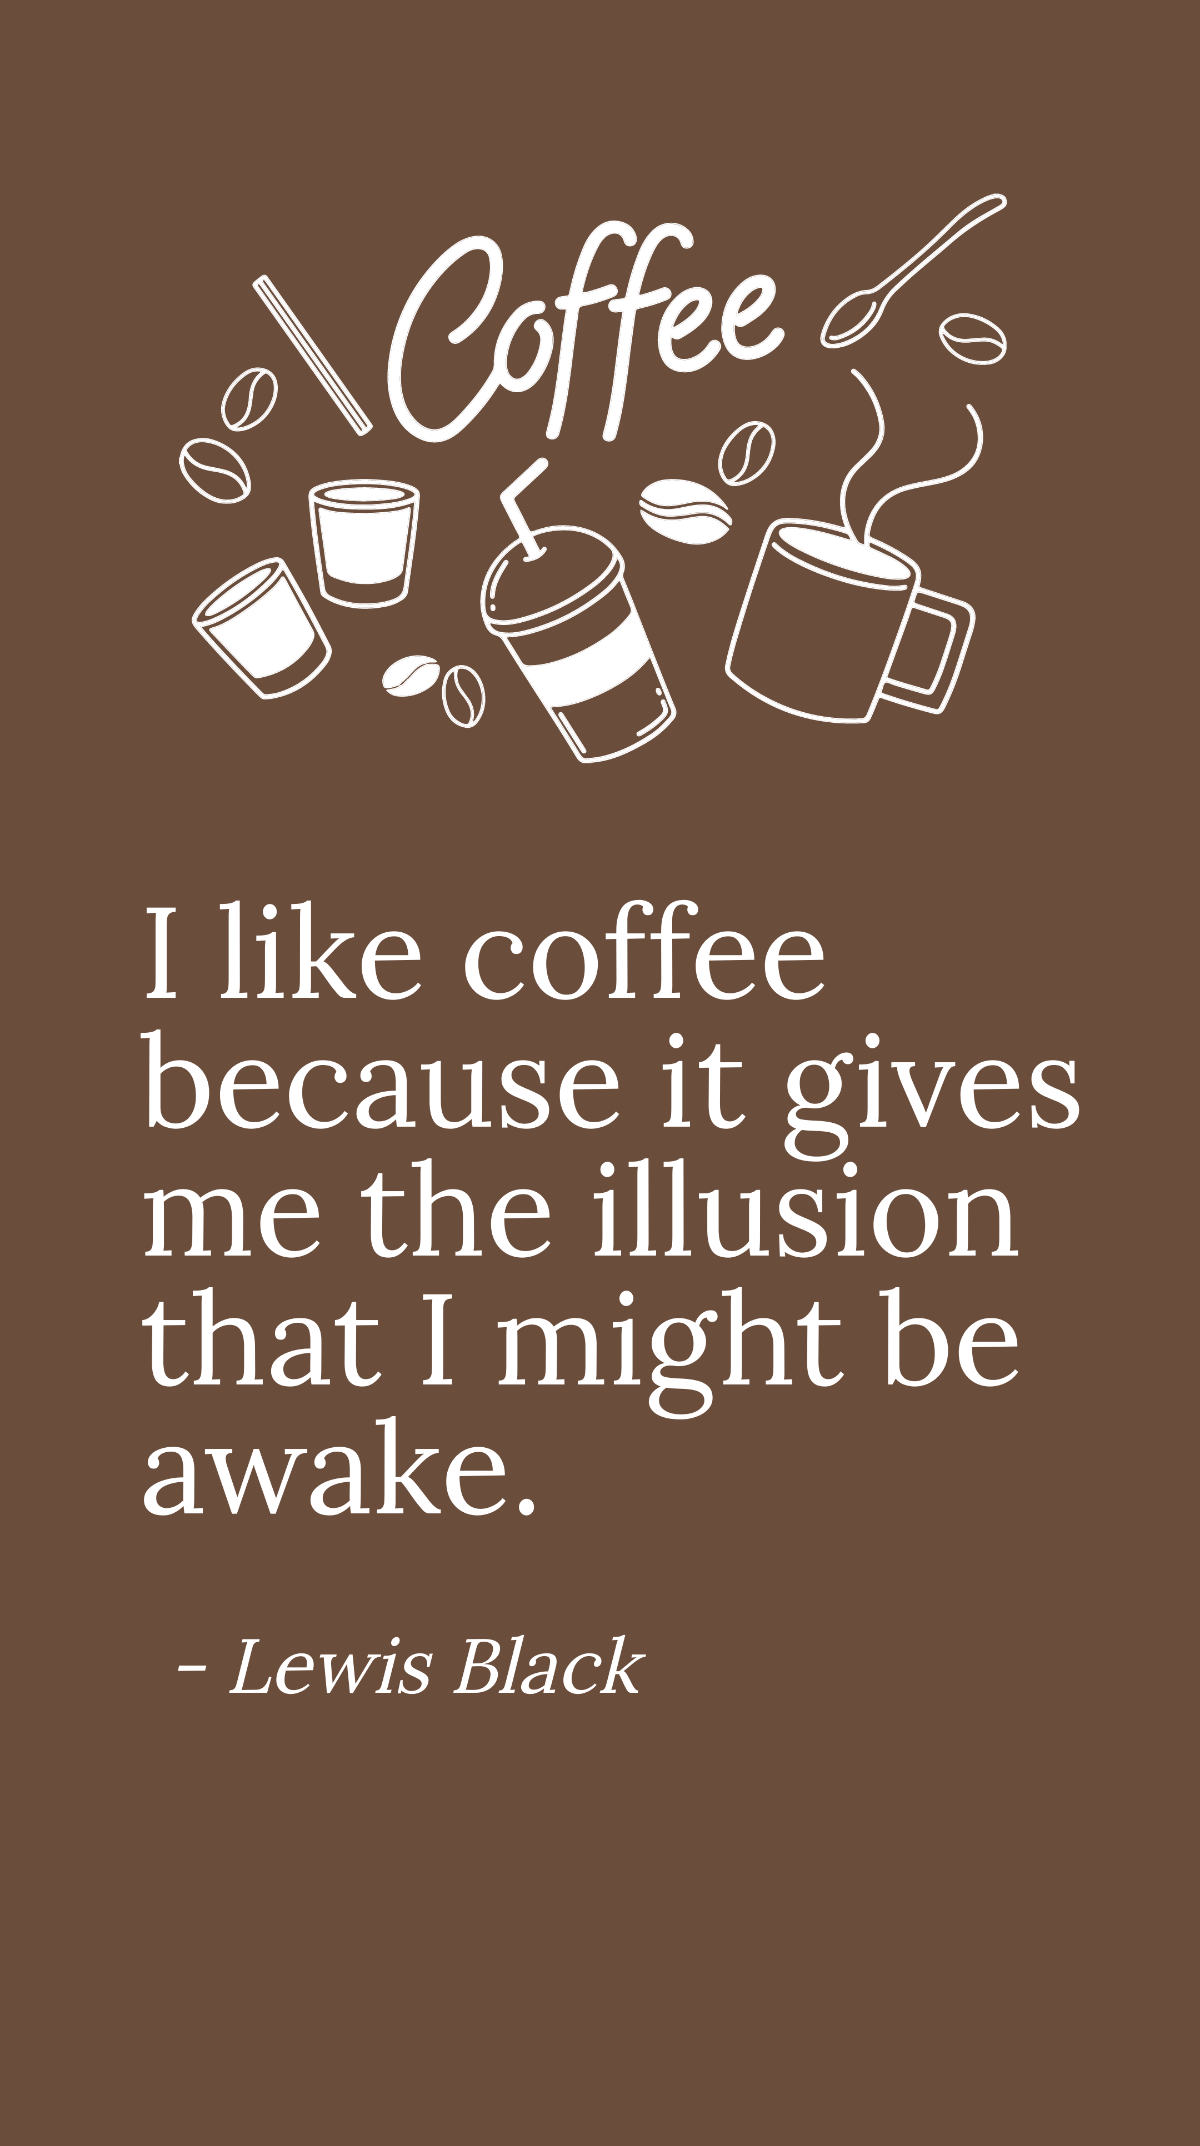 Lewis Black- I like coffee because it gives me the illusion that I might be awake. Template